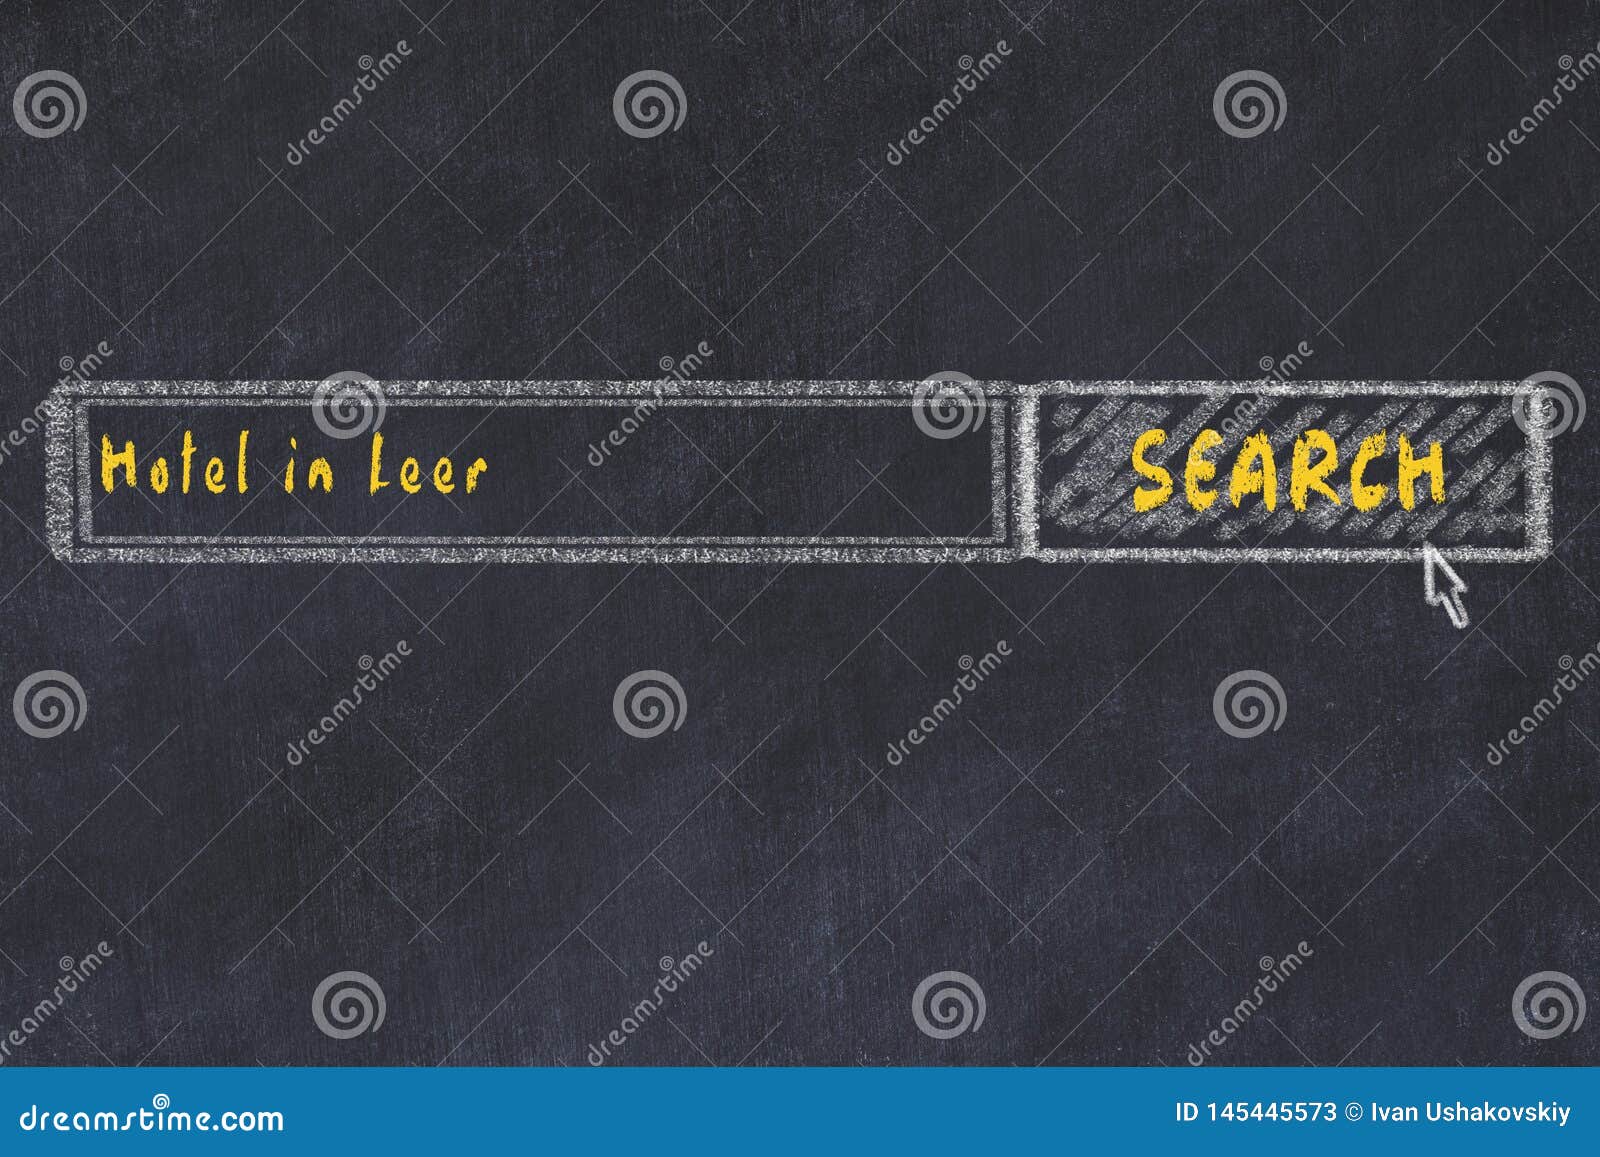 chalk sketch of search engine. concept of searching and booking a hotel in leer